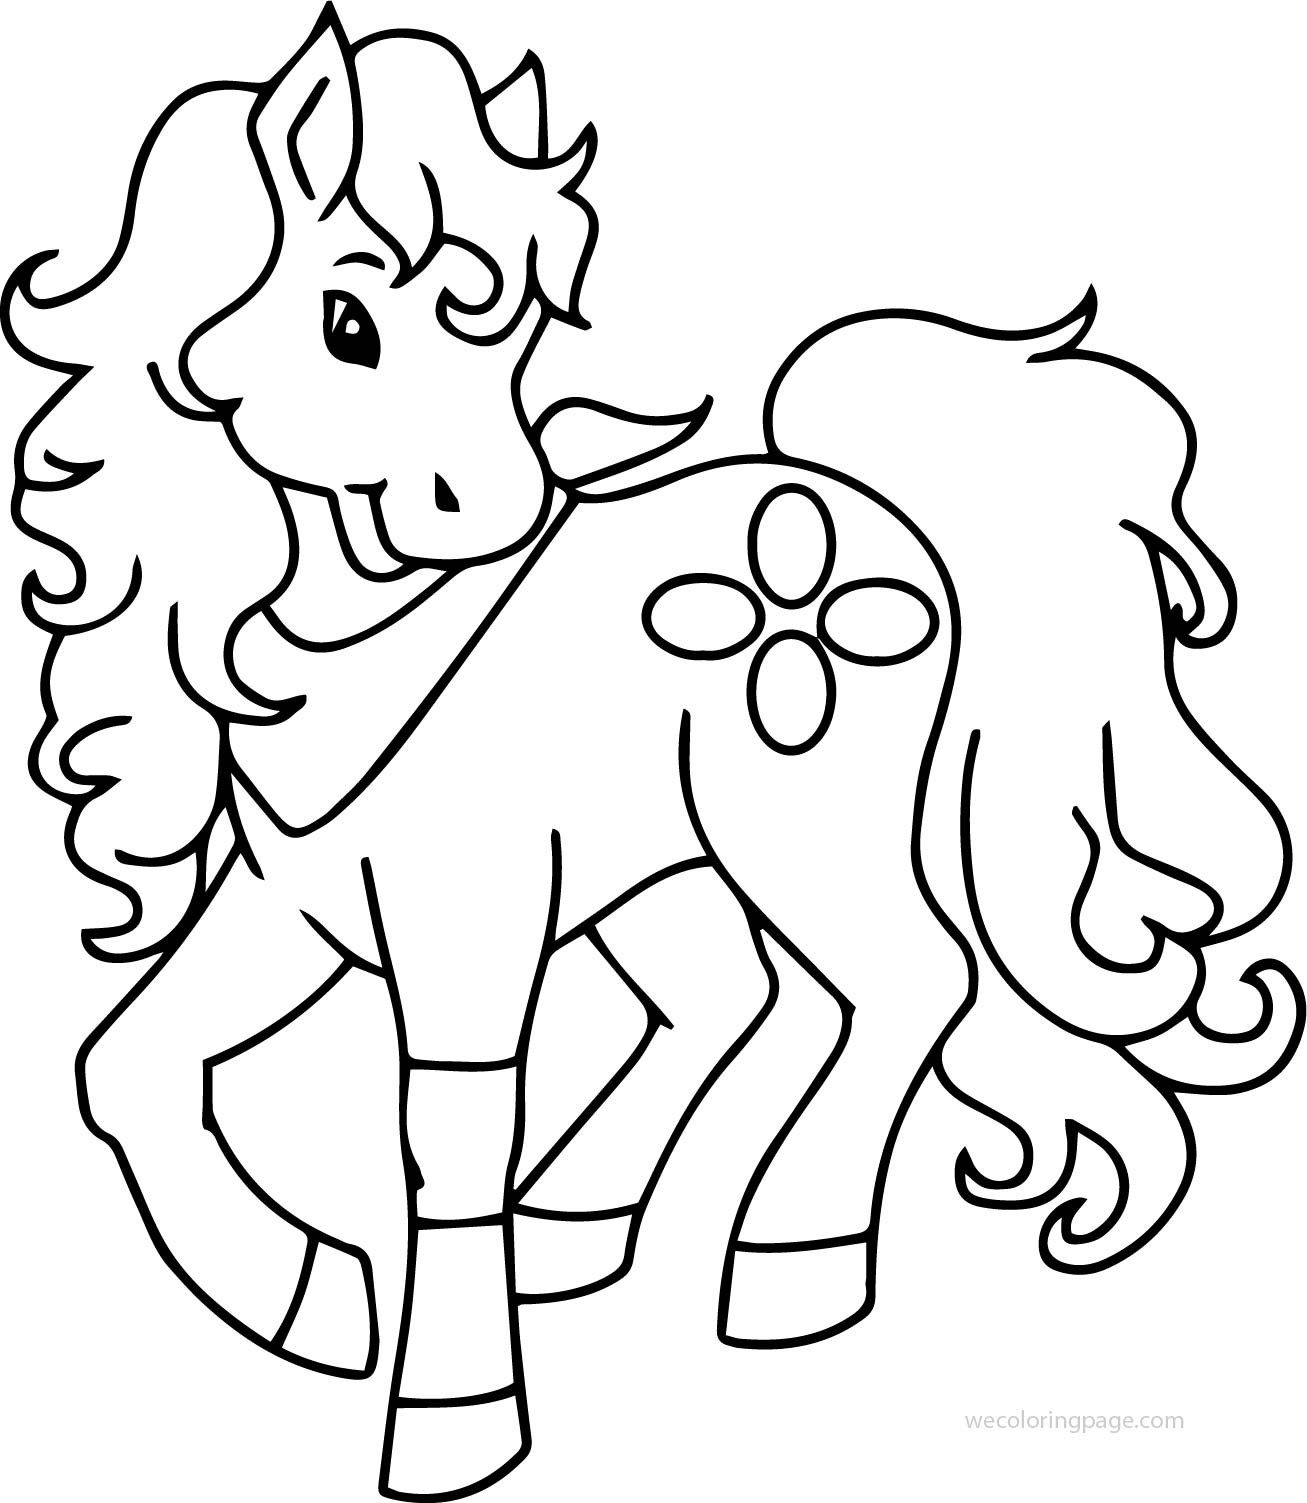 Cute Horse Coloring Pages
 Pony Horse Cute Free Download Coloring Page